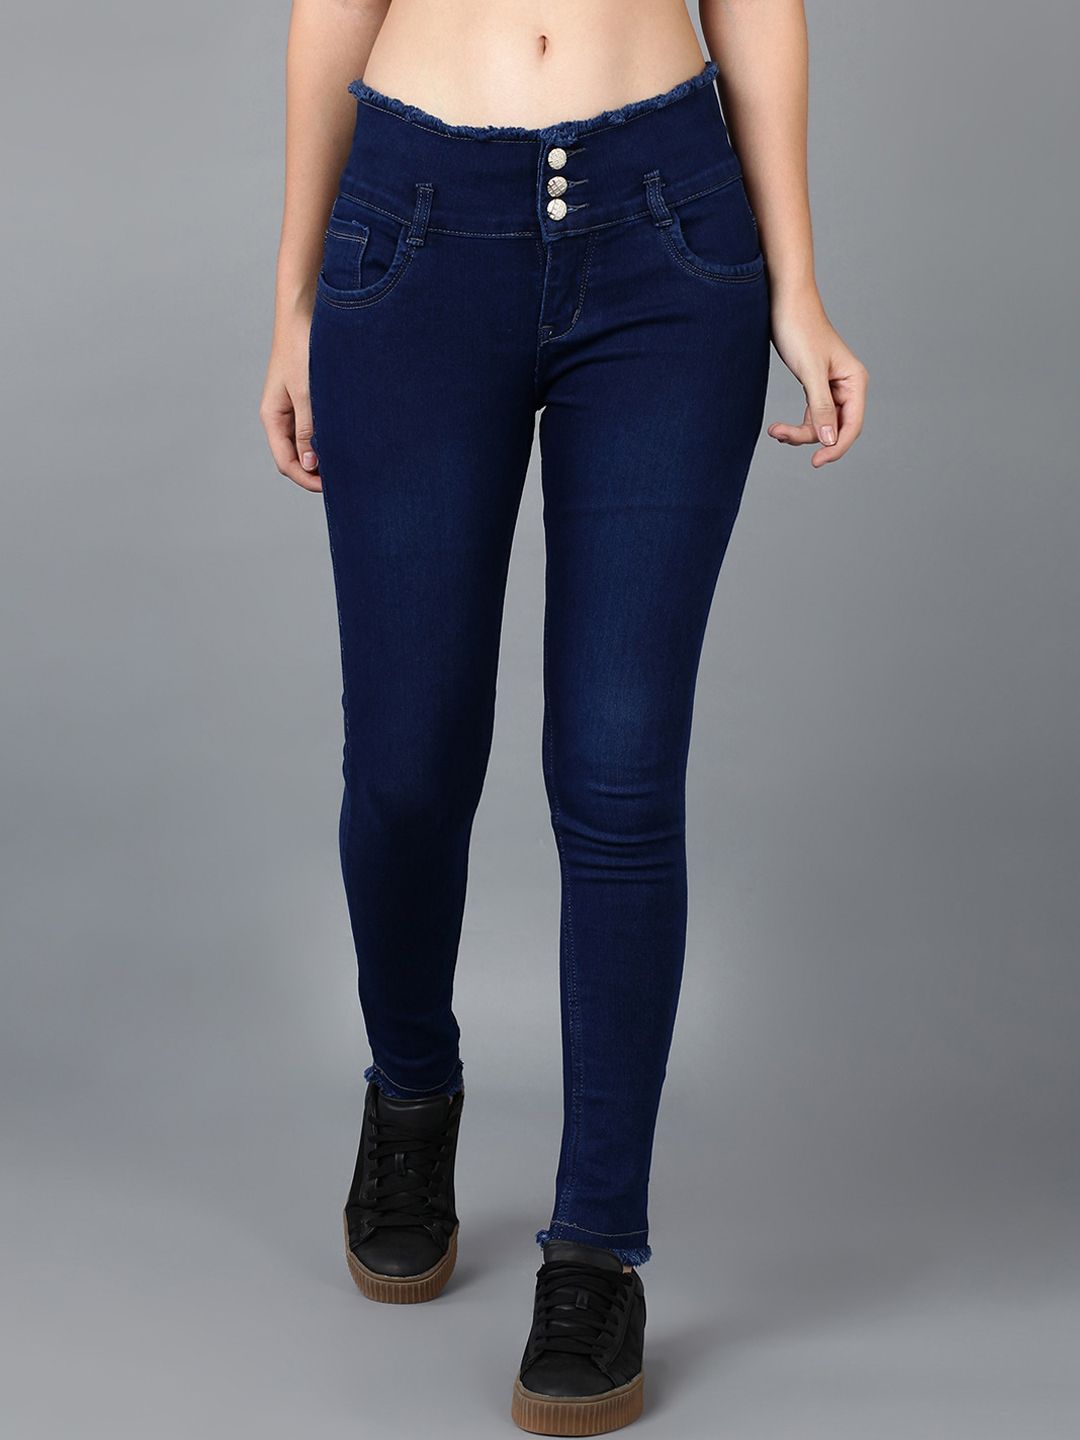 F2M Women Blue Slim Fit Stretchable Jeans Price in India